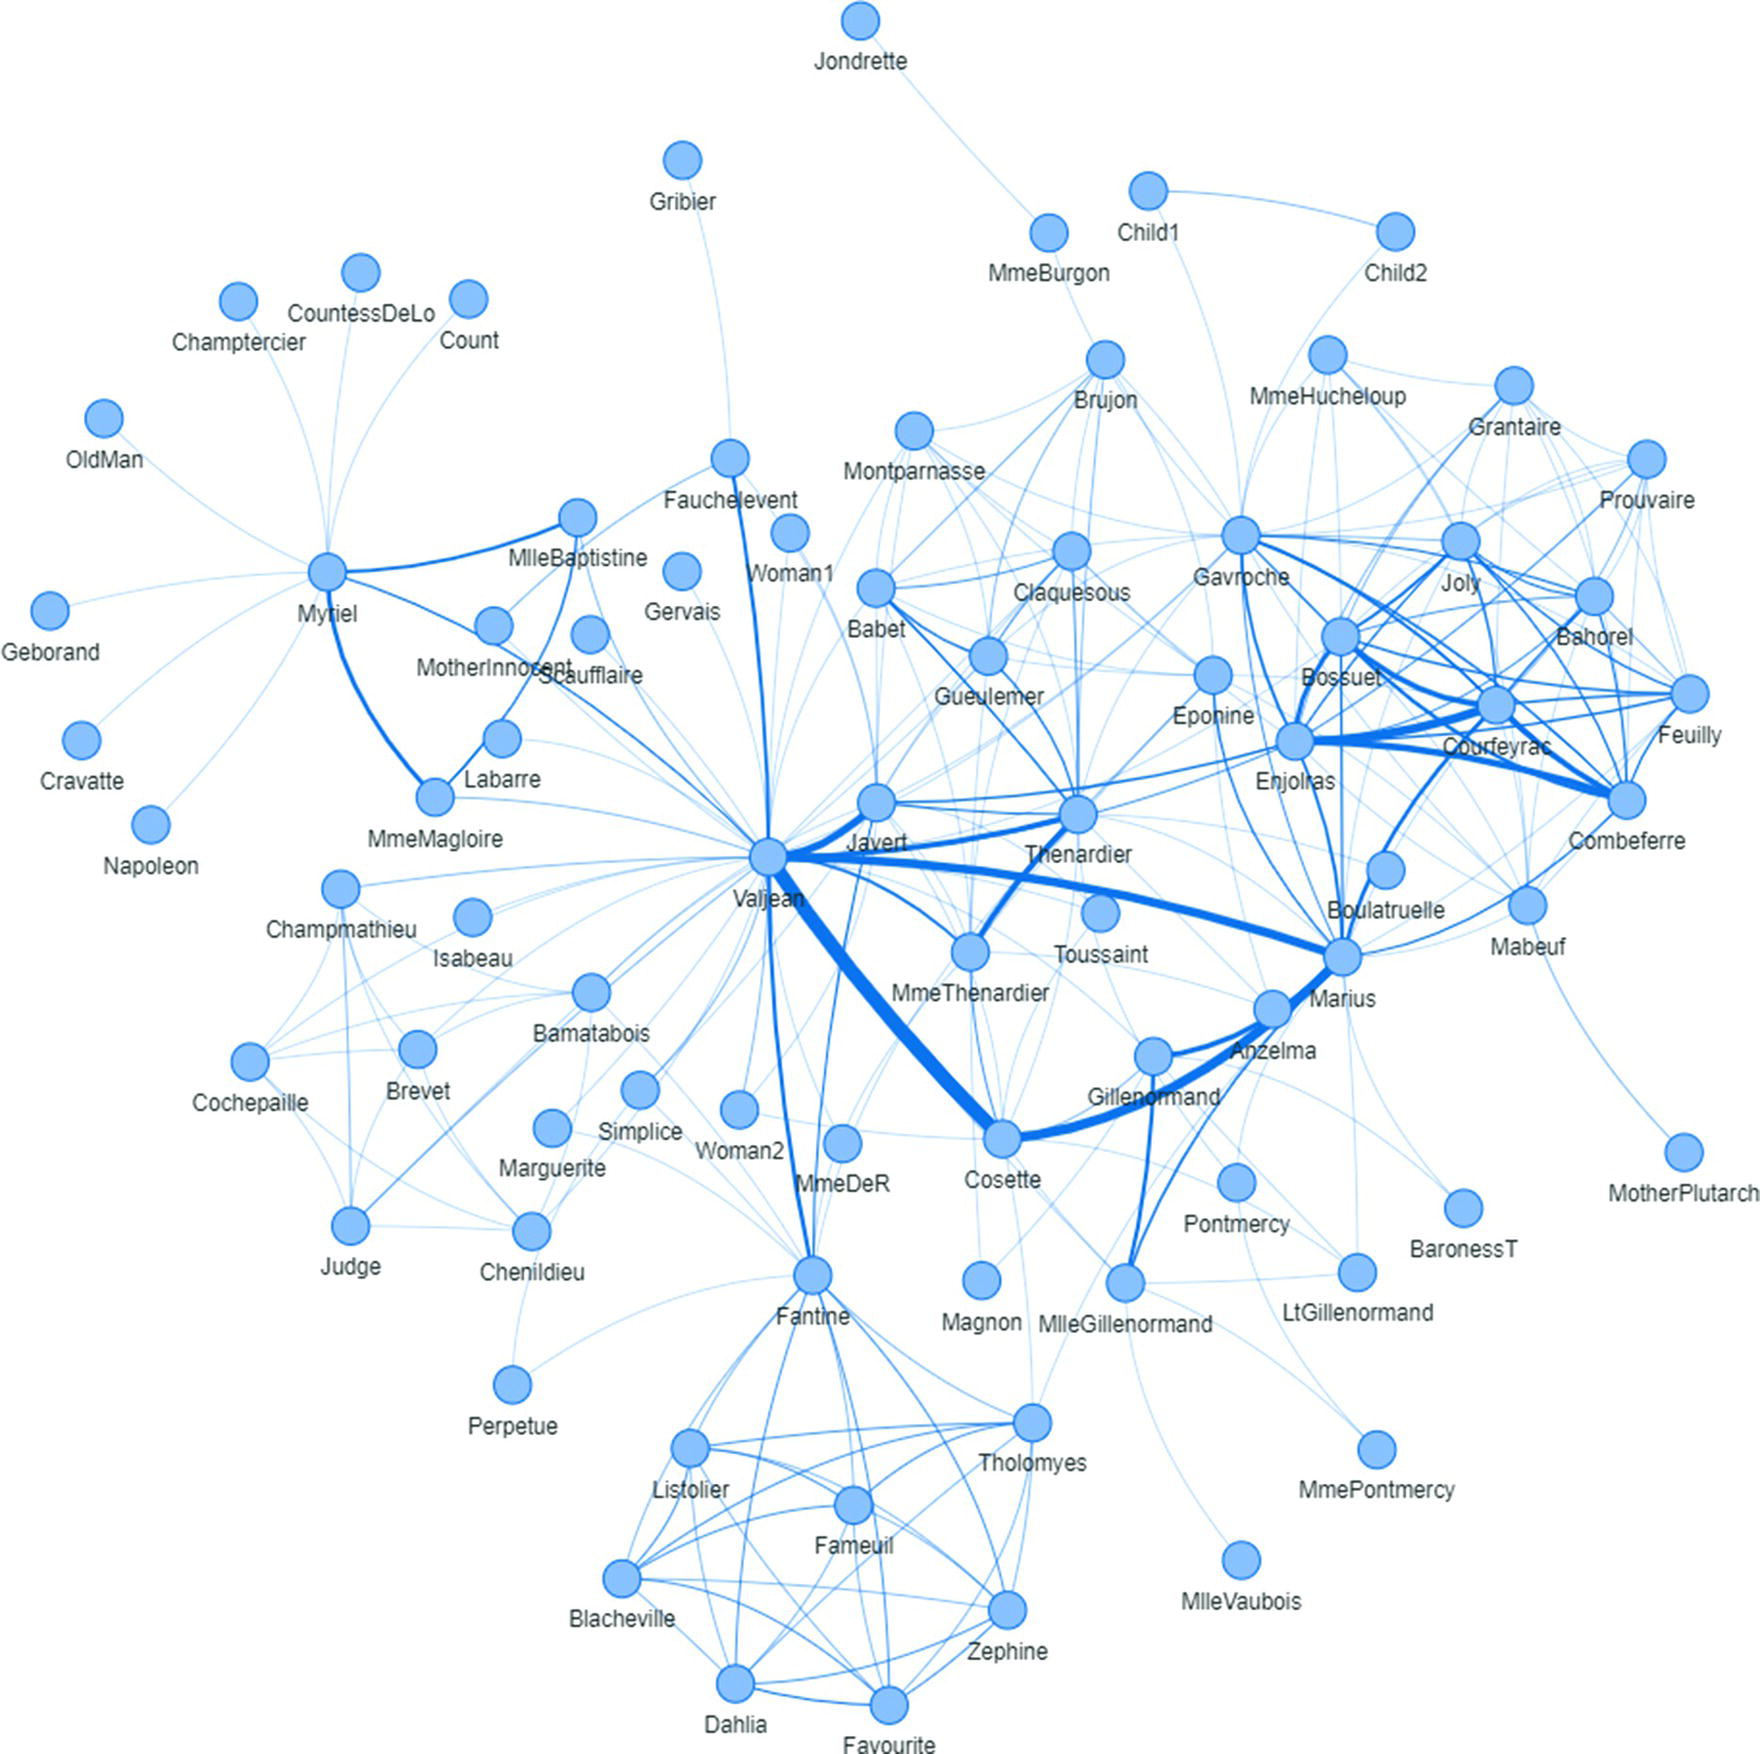 Schematic illustration of les Miserable network.